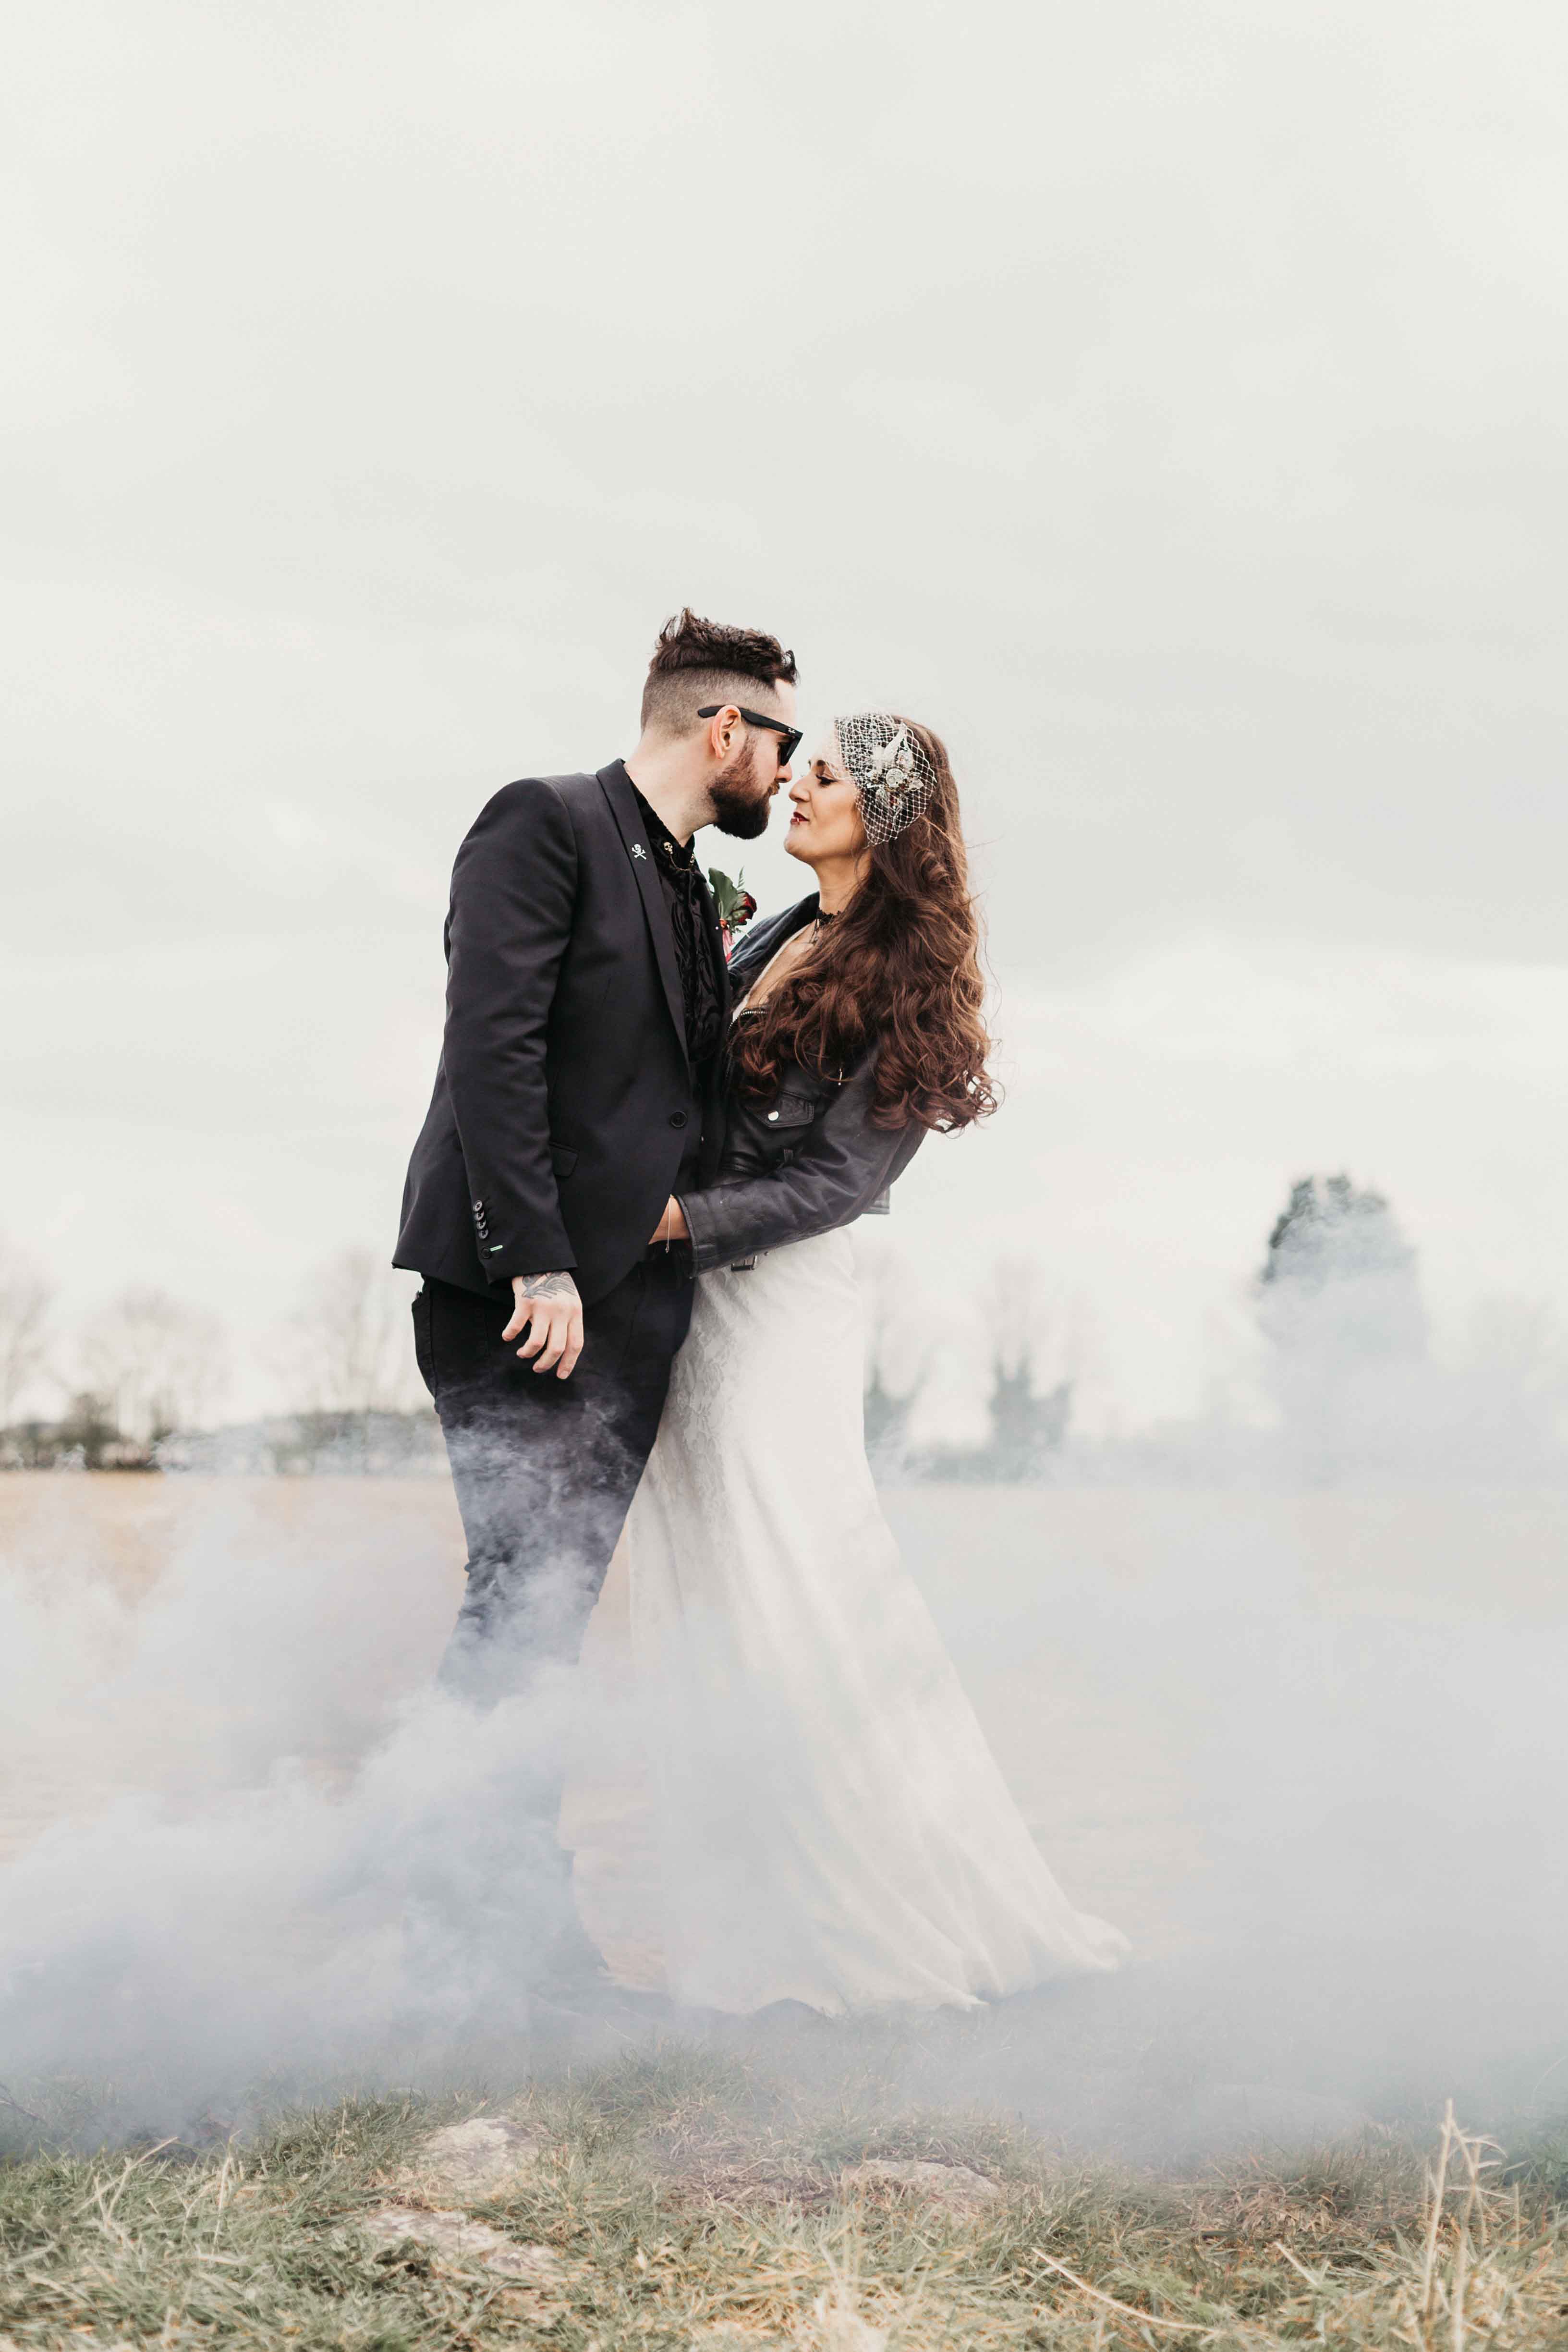 This cool wedding was inspired by heavy metal, whihc is loved both by the bride and groom